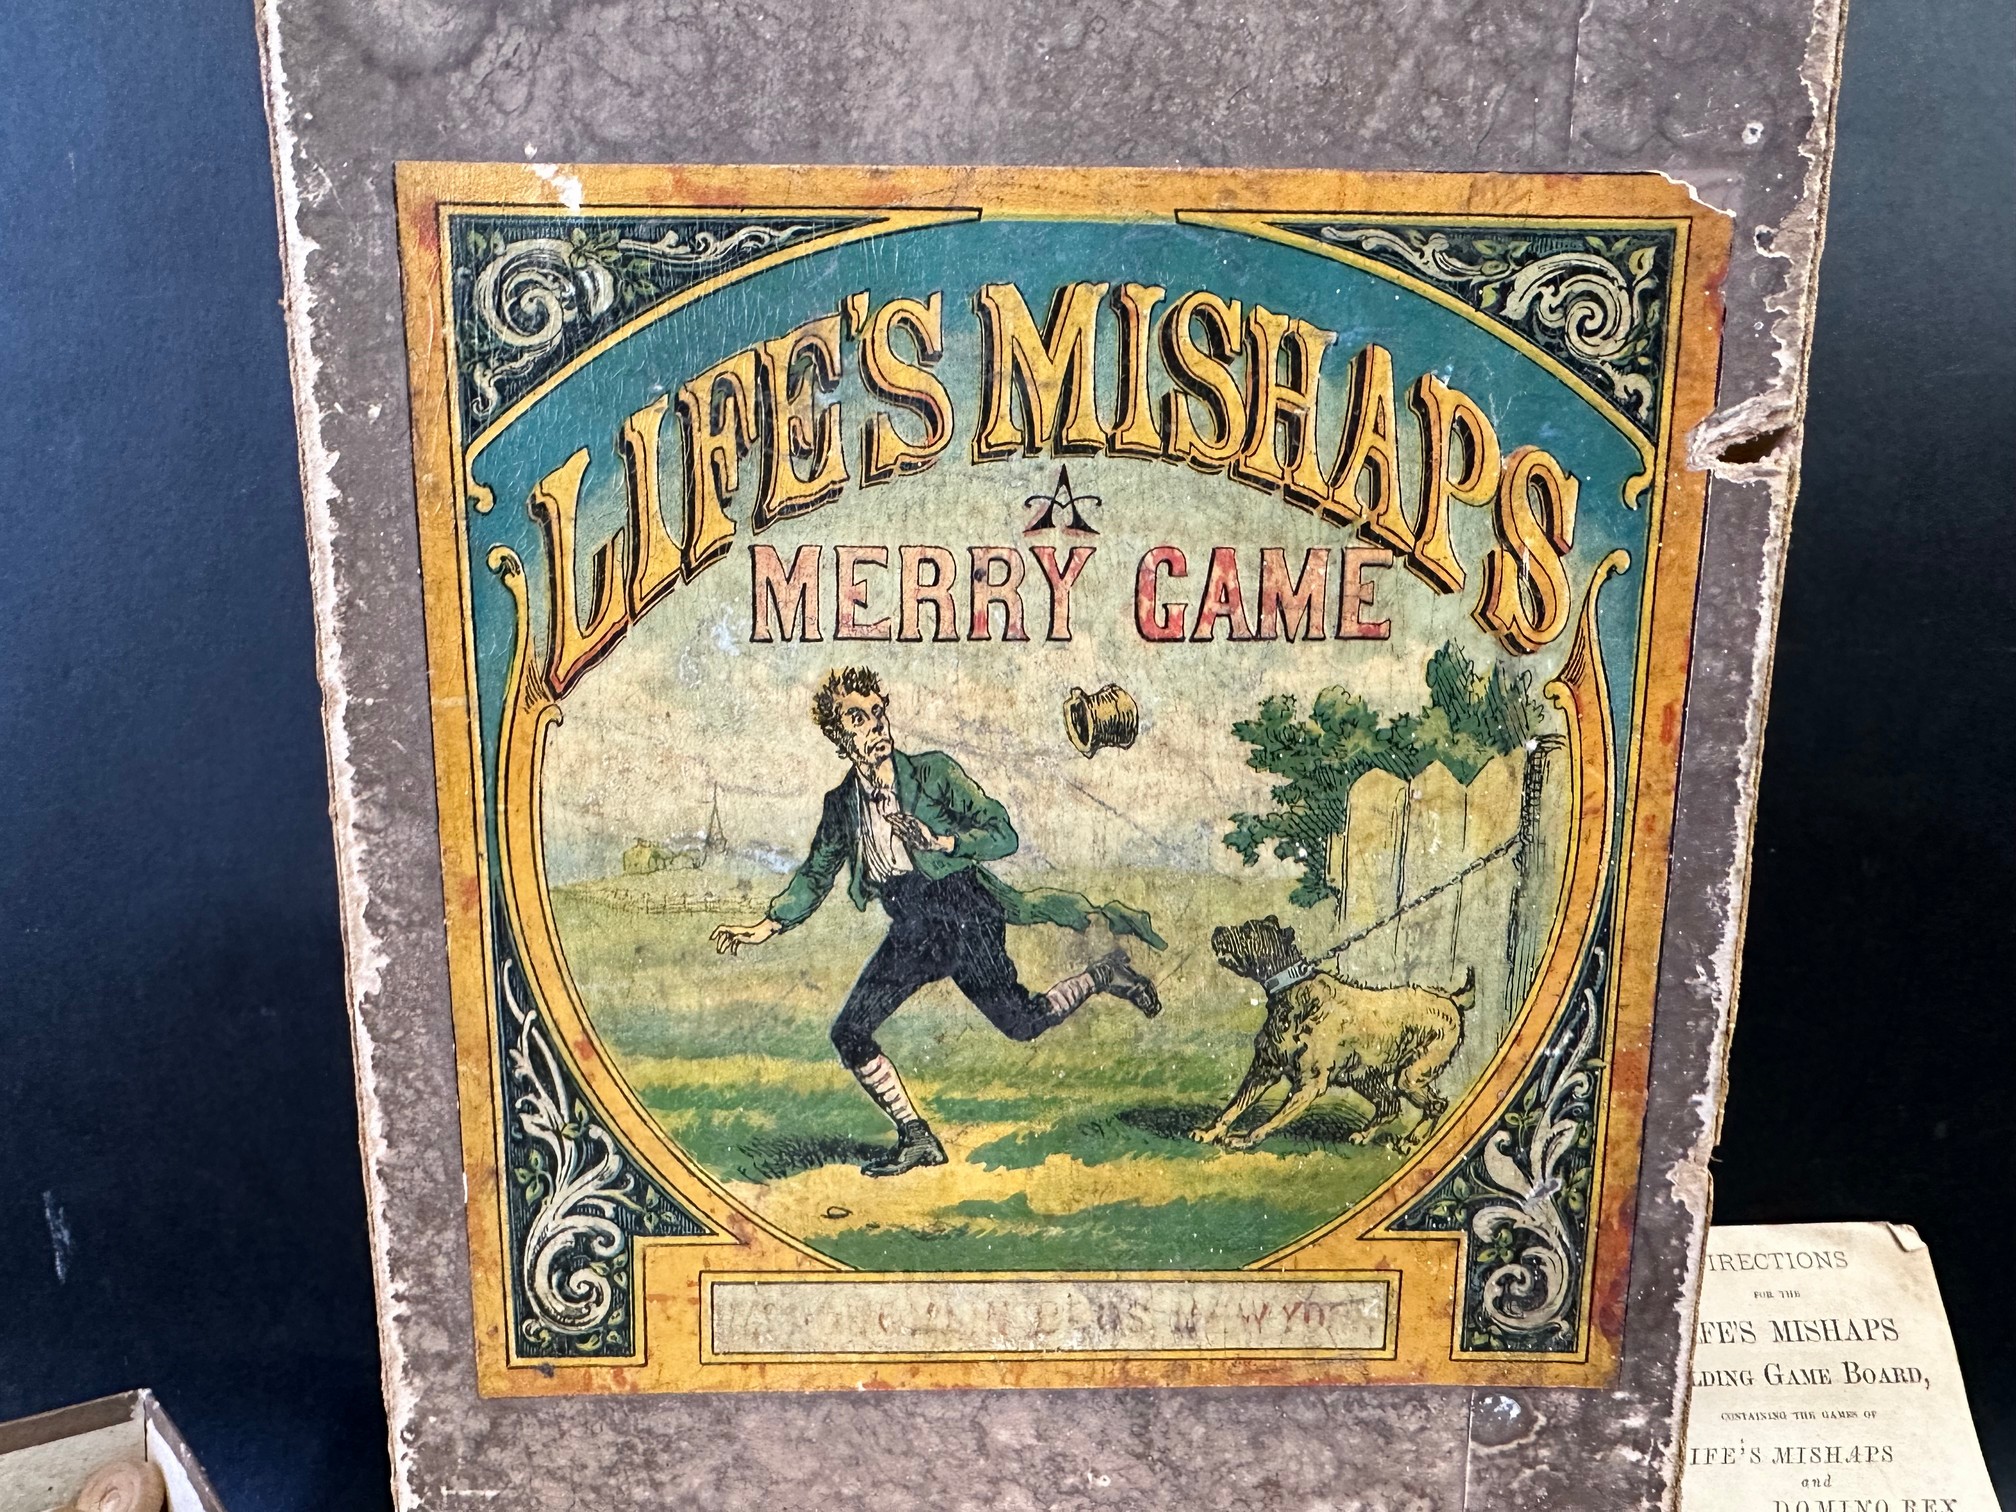 Life's Mishaps - A Merry Game by McLoughlin, folding game board in original slip case, with original - Image 3 of 4